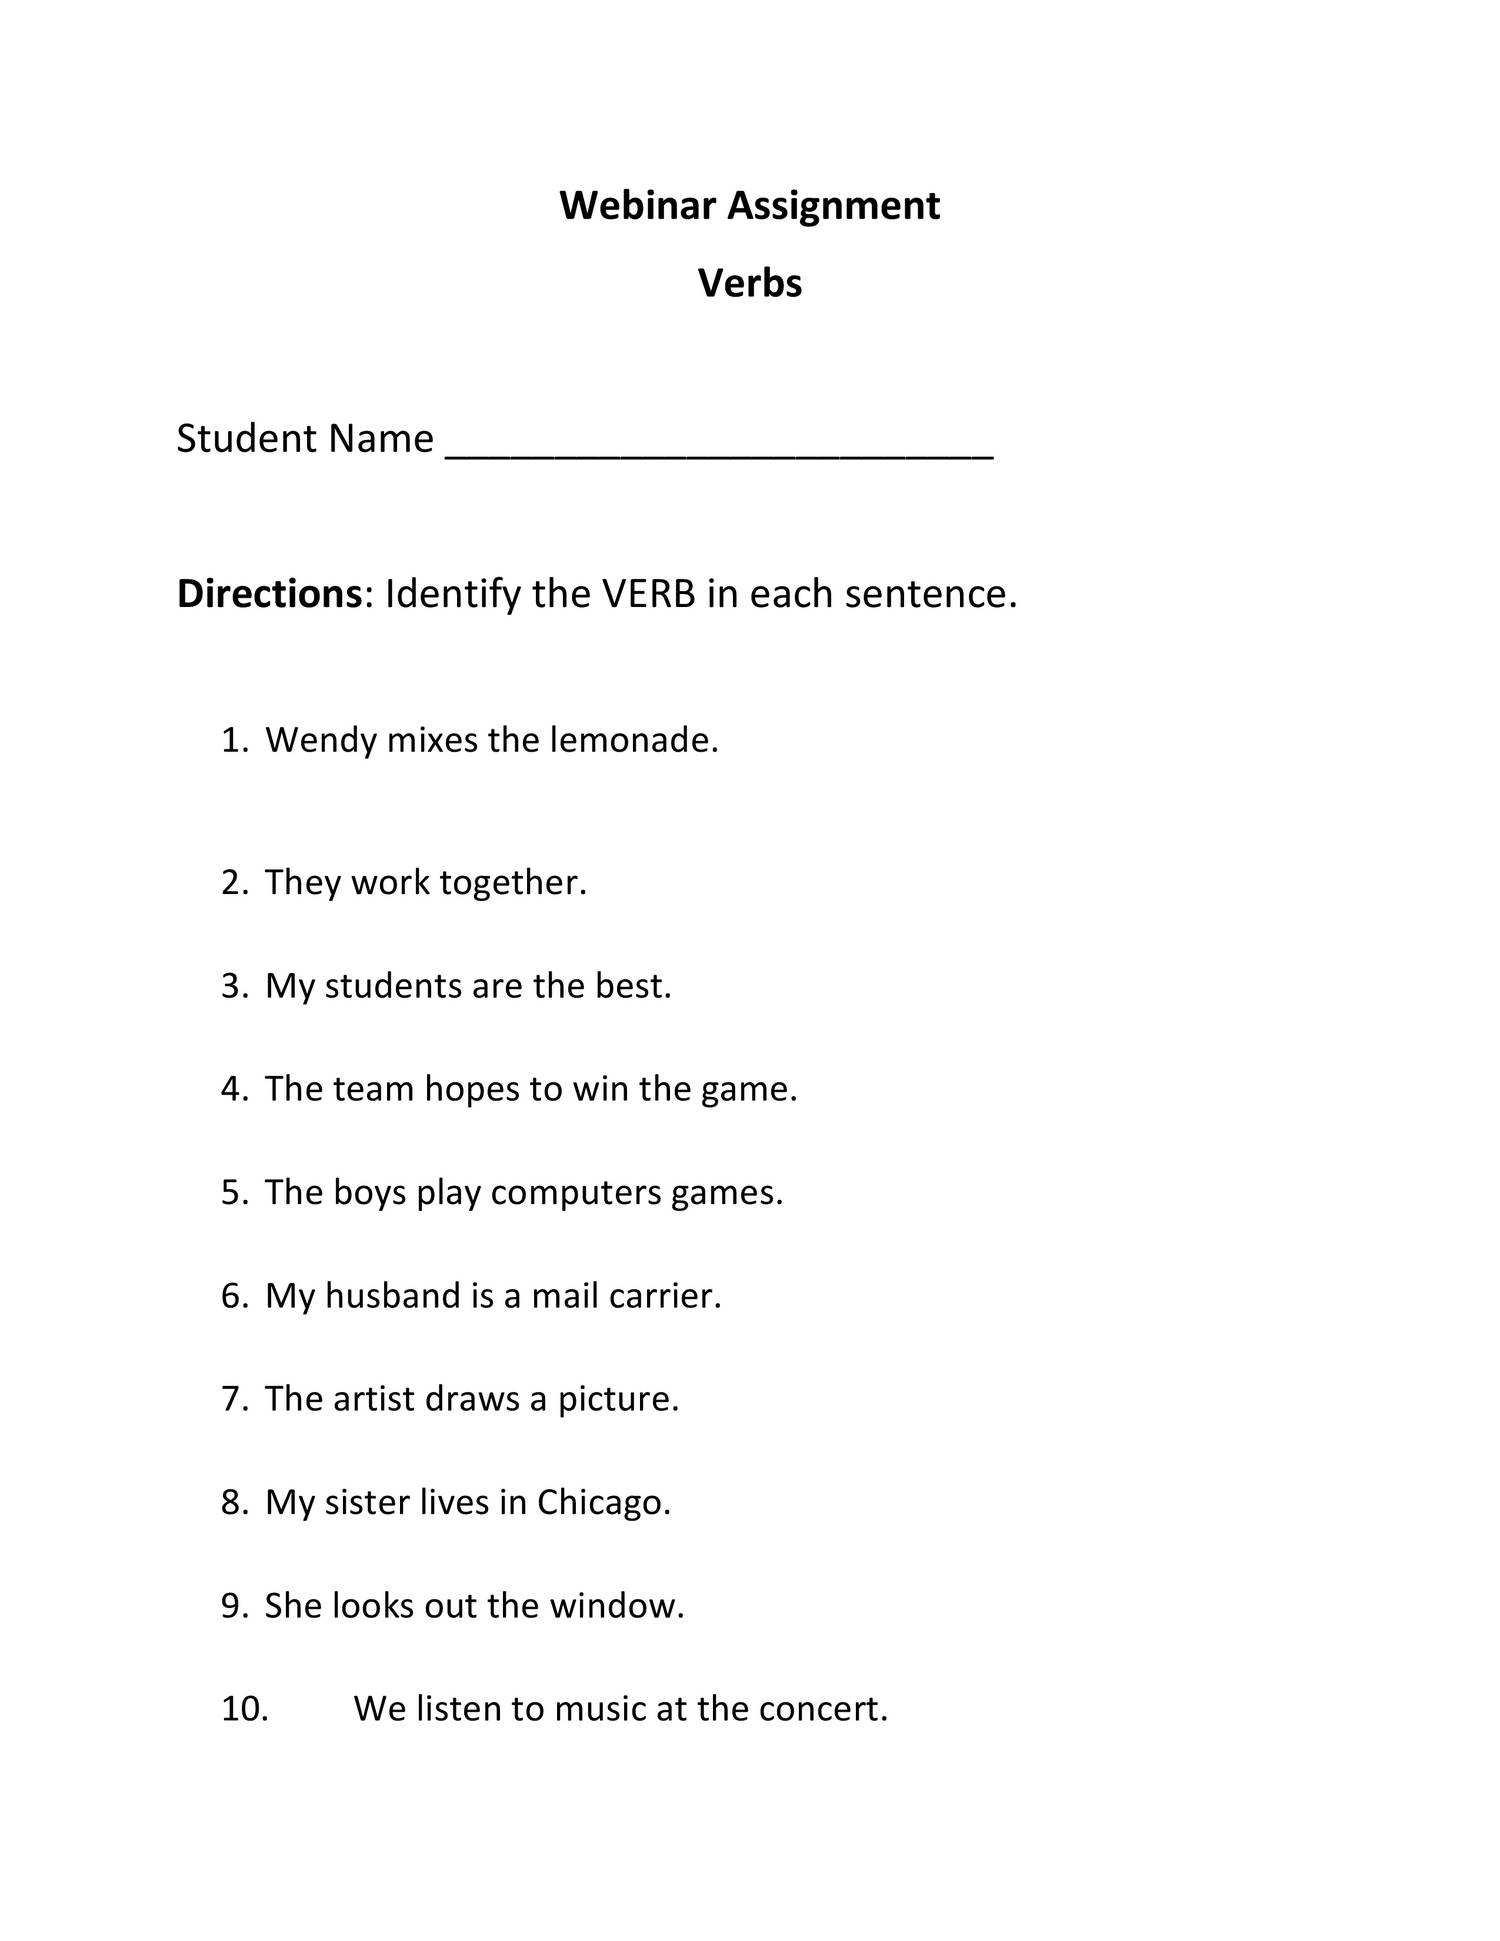 assignment on verb